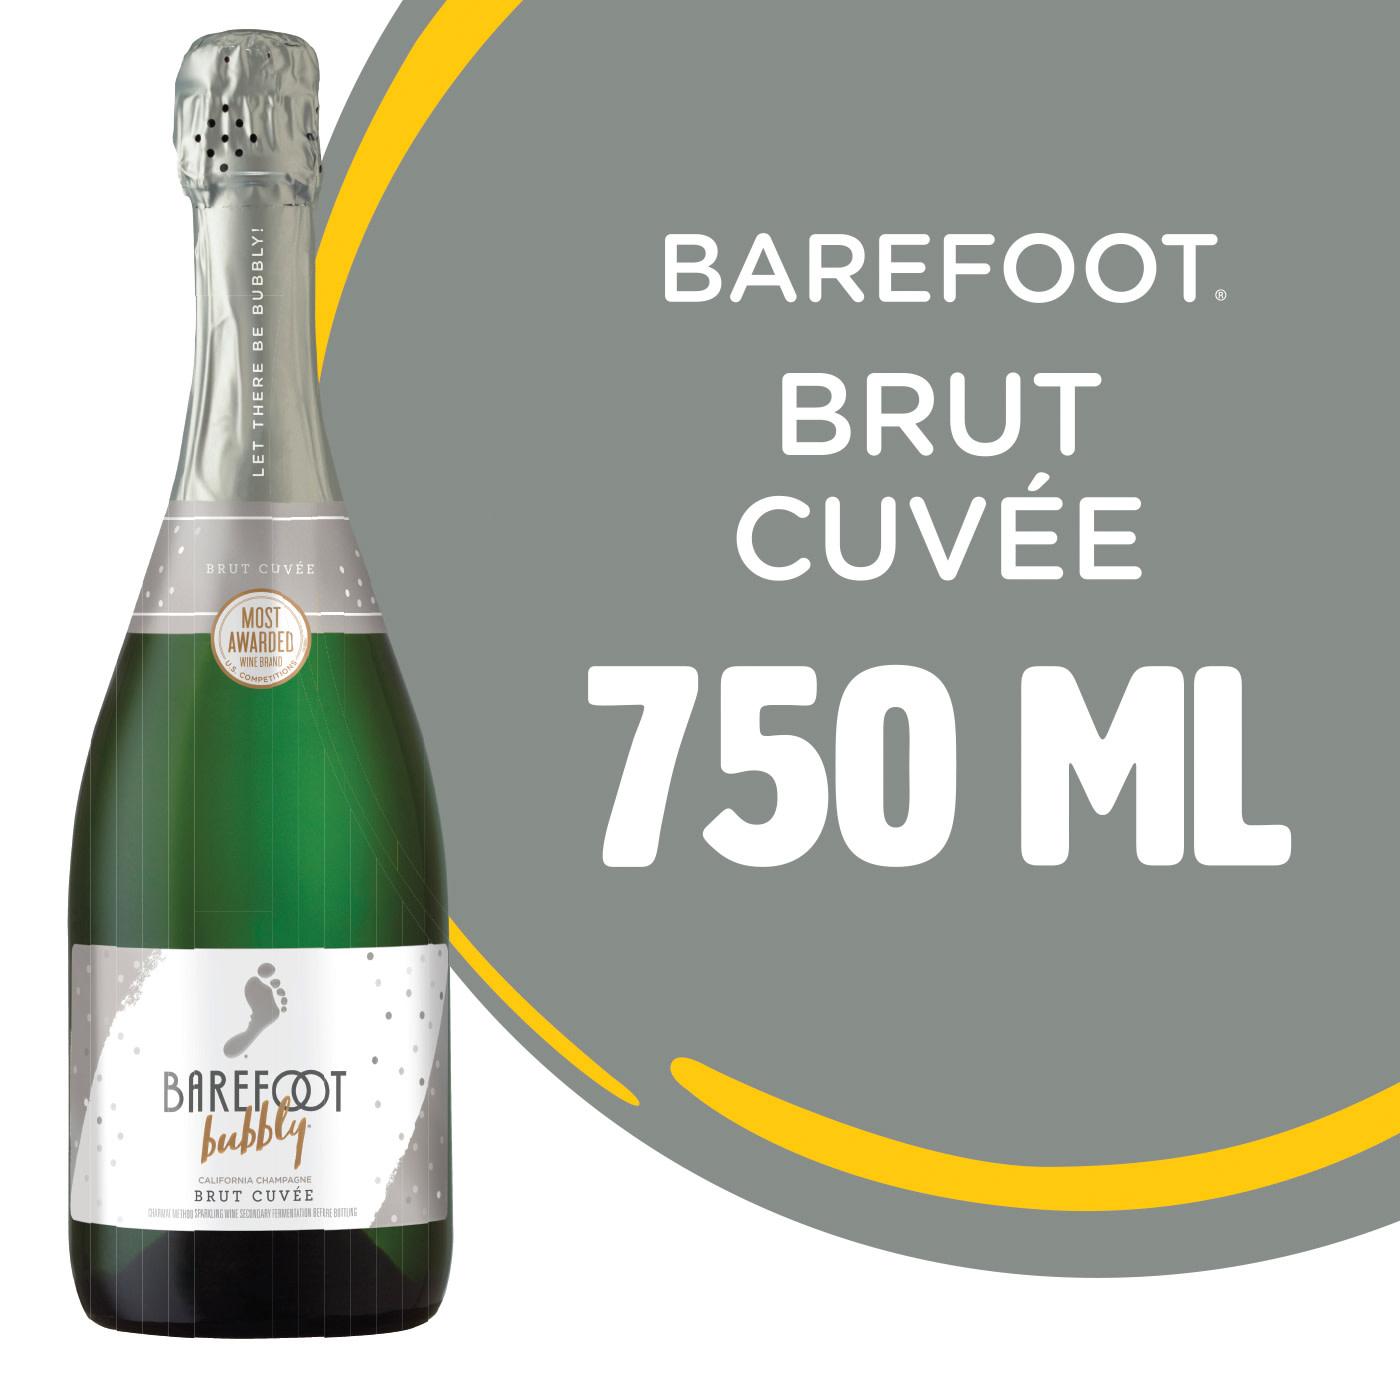 Barefoot Bubbly Brut Cuvee Champagne Sparkling Wine; image 3 of 4